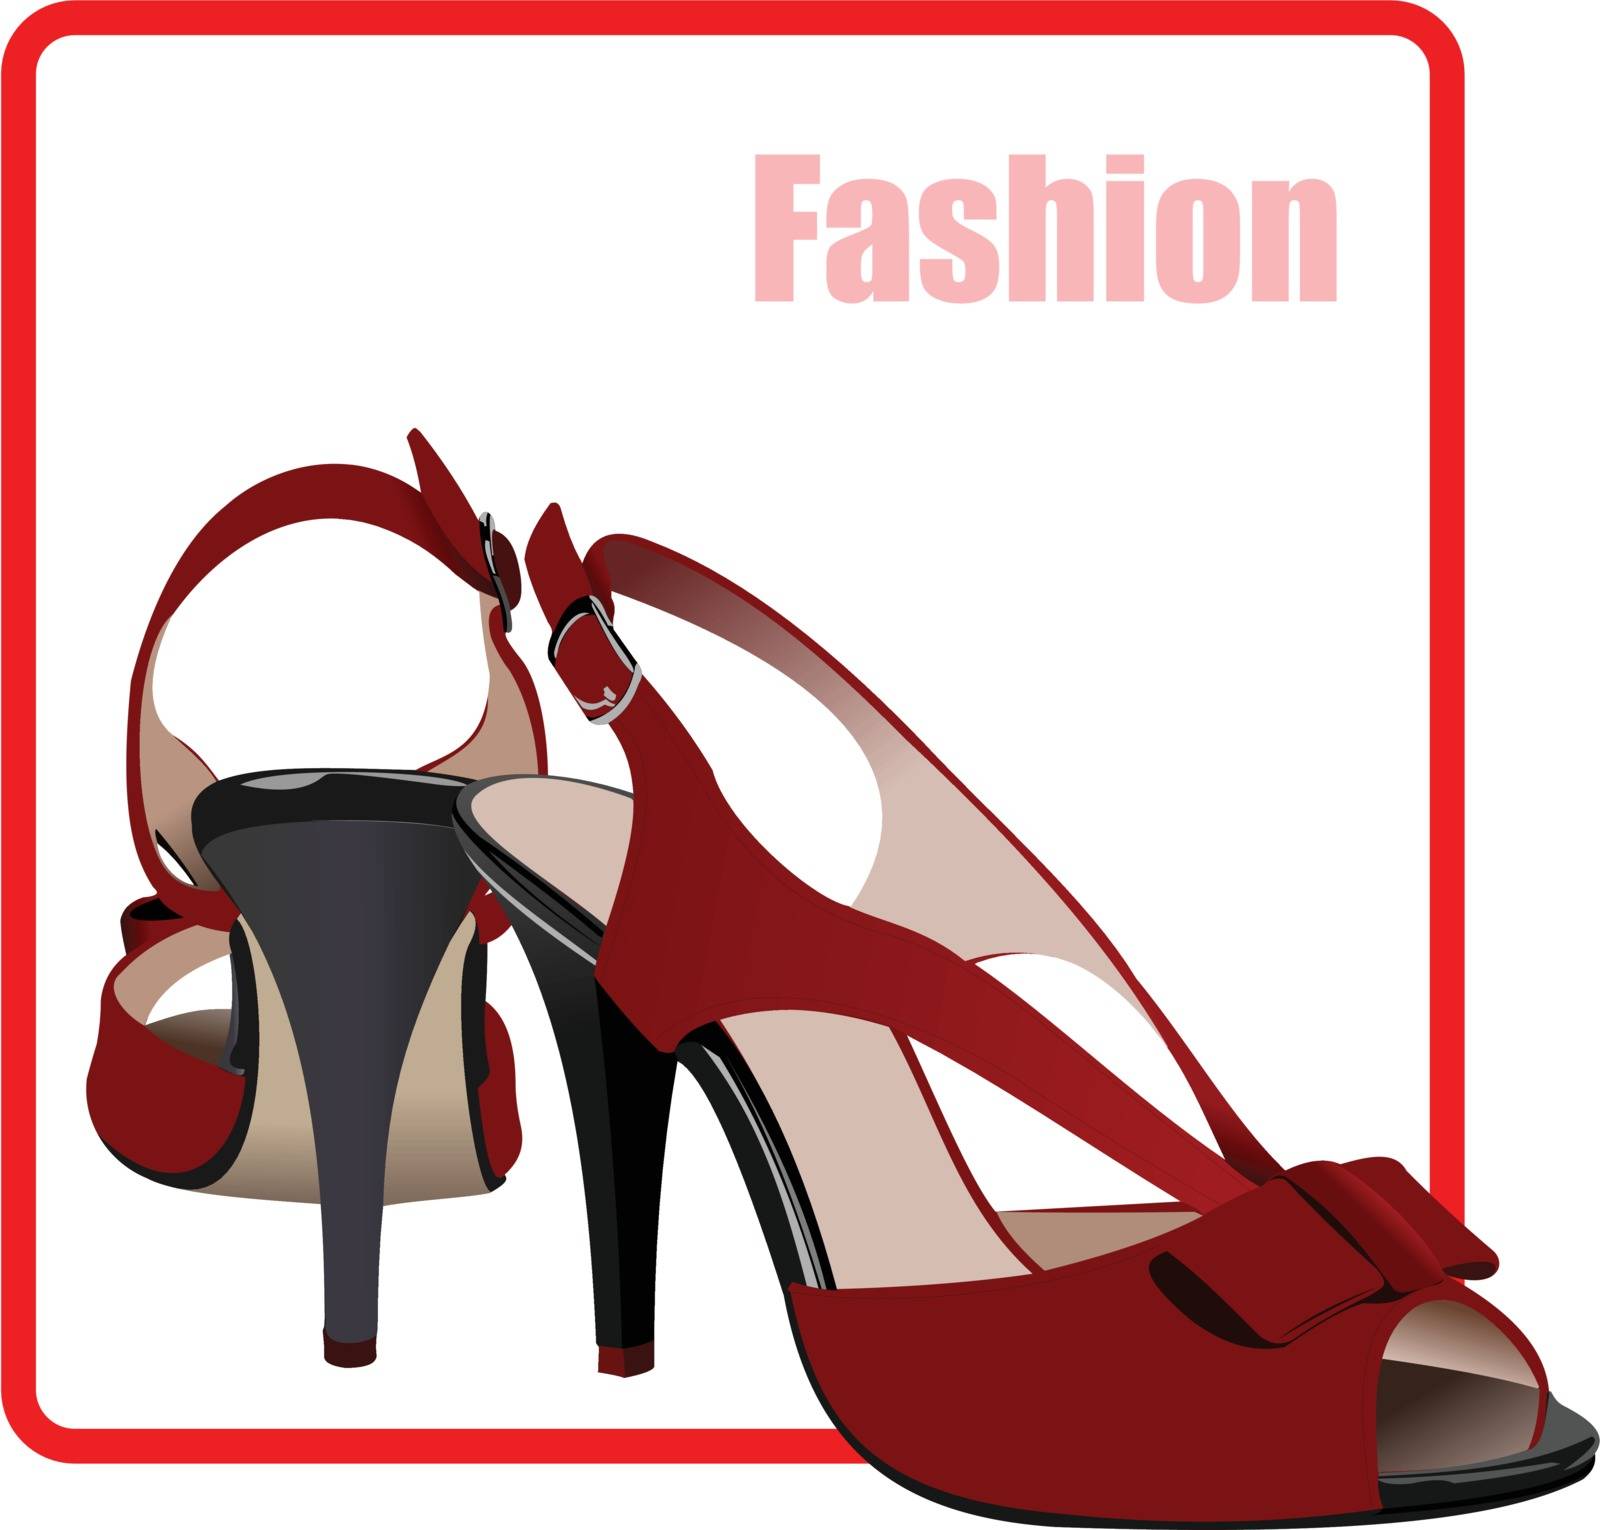 Fashion woman red shoes poster. Vector illustration by leonido